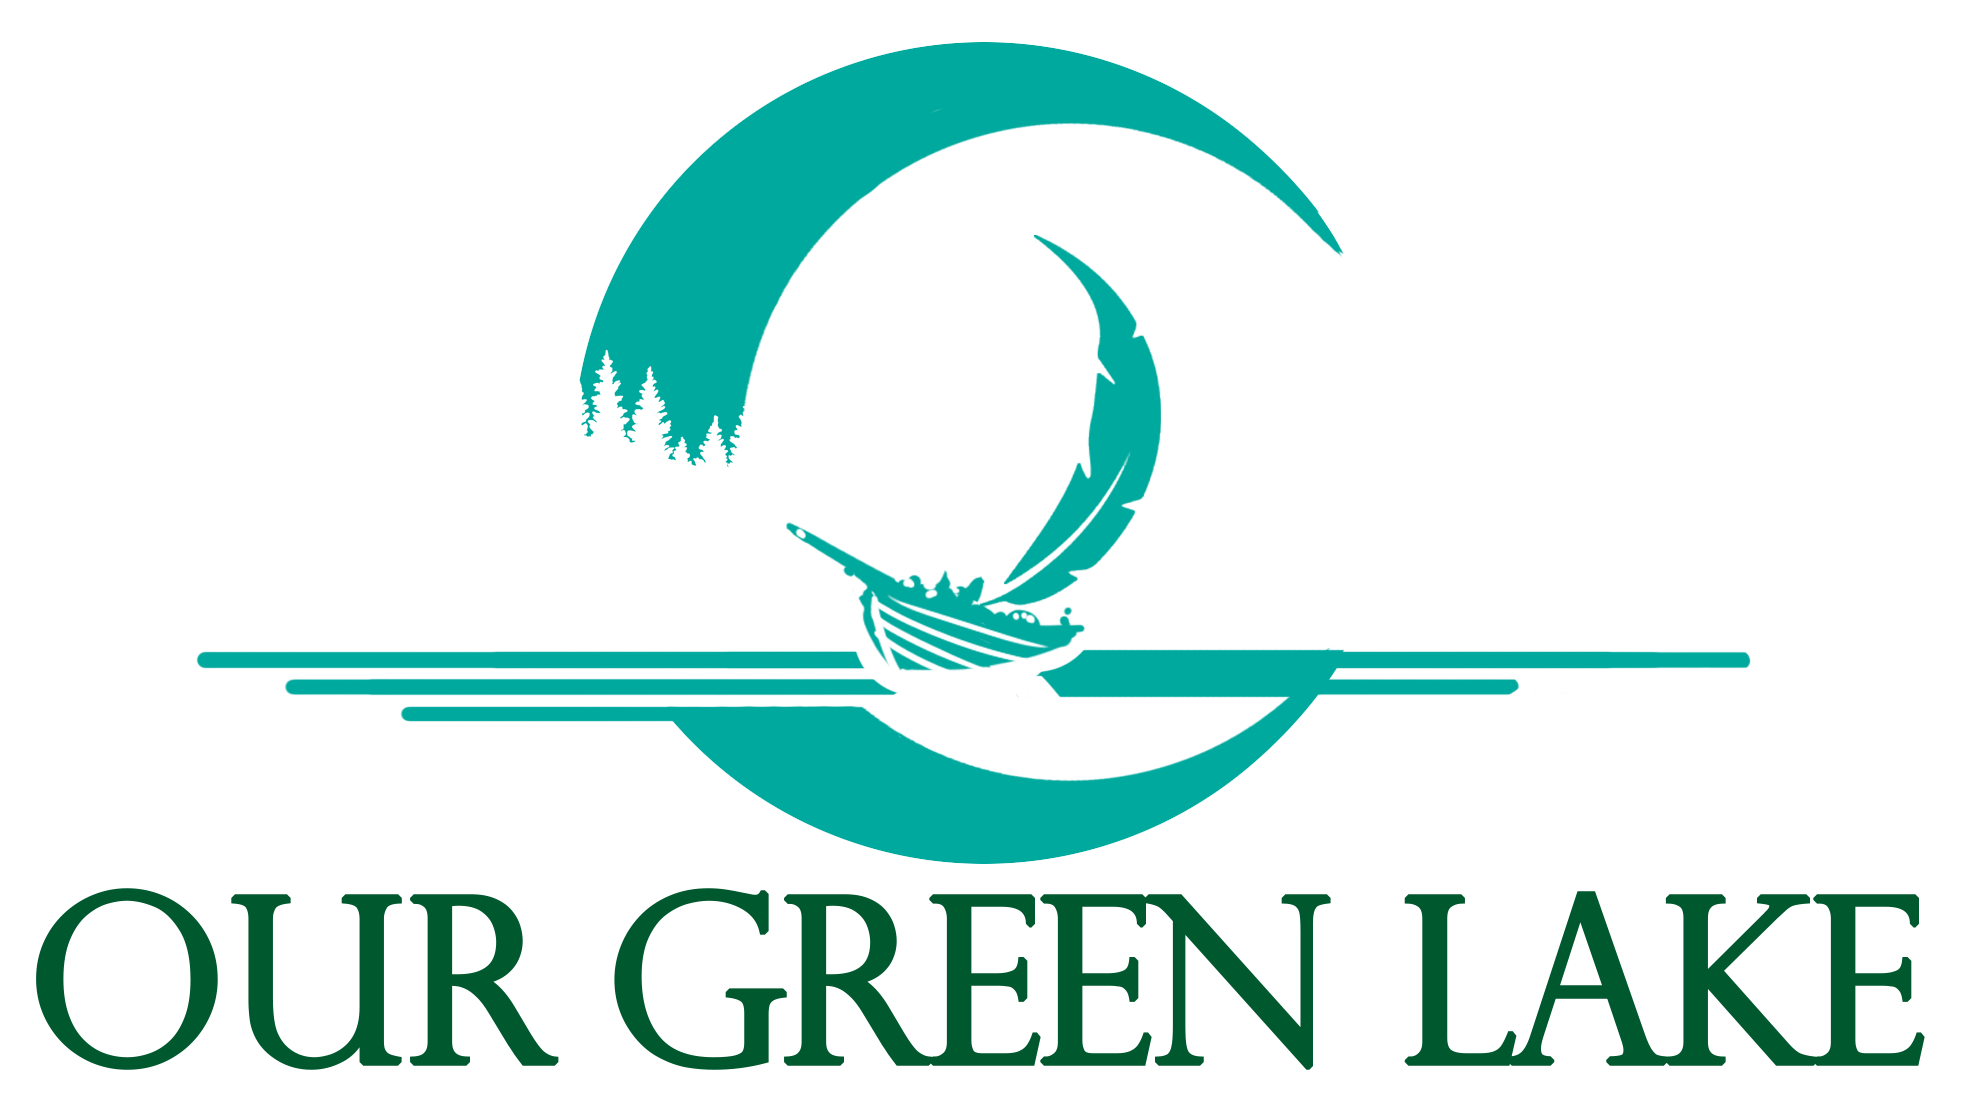 ourgreenlake.com